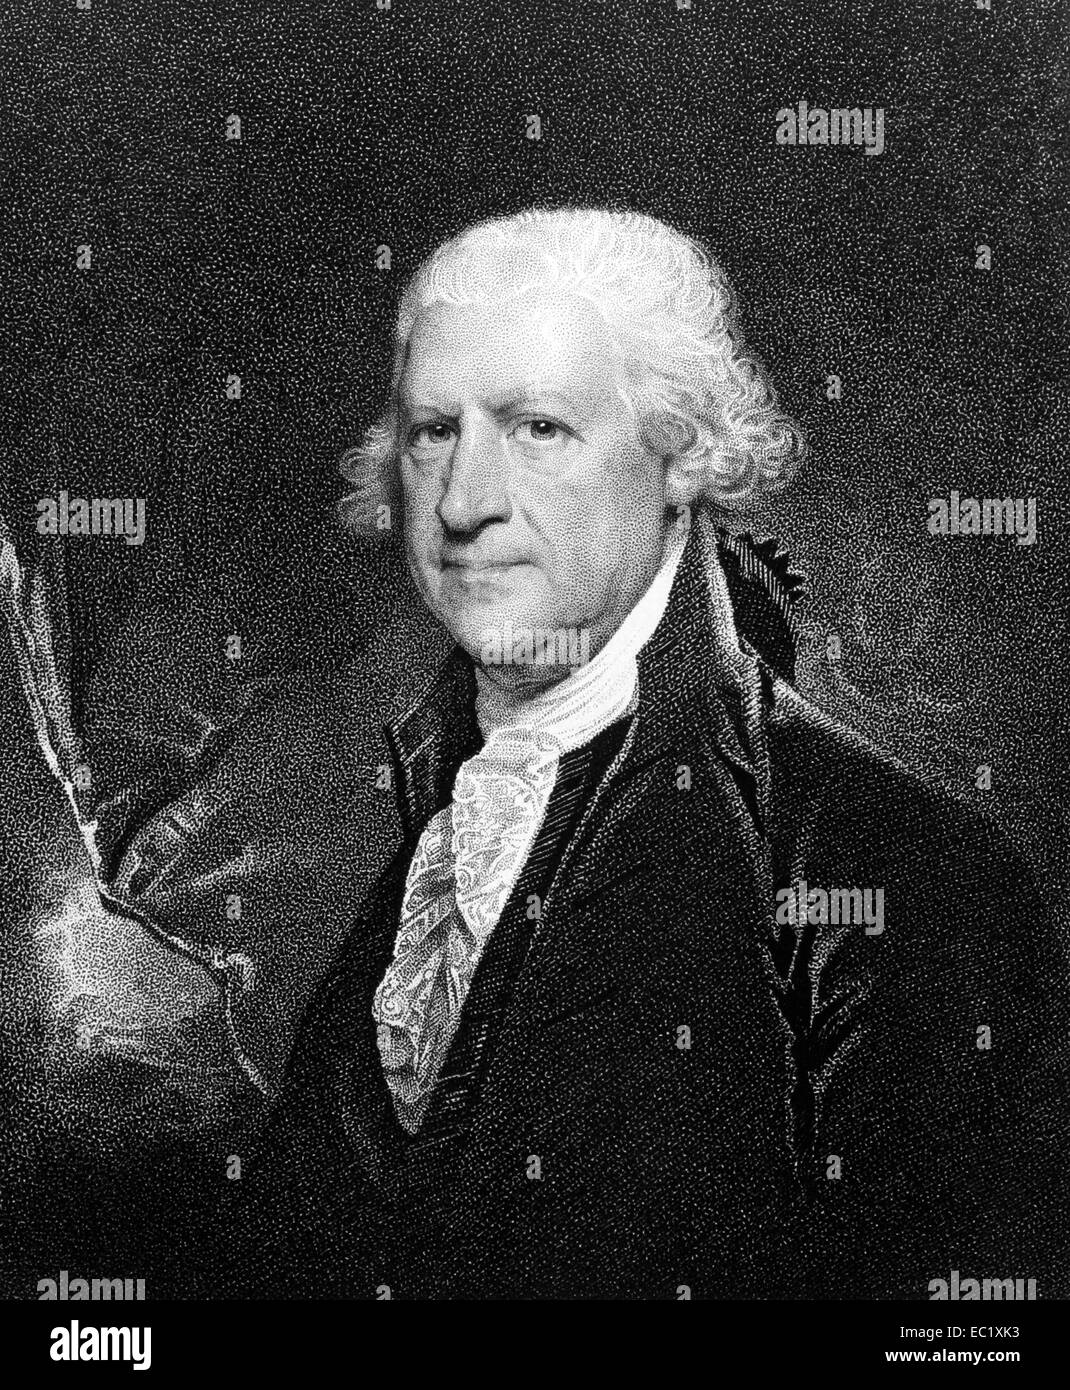 Edward Shippen, IV (1729-1806) on engraving from 1834. Lawyer, judge and government official. Stock Photo